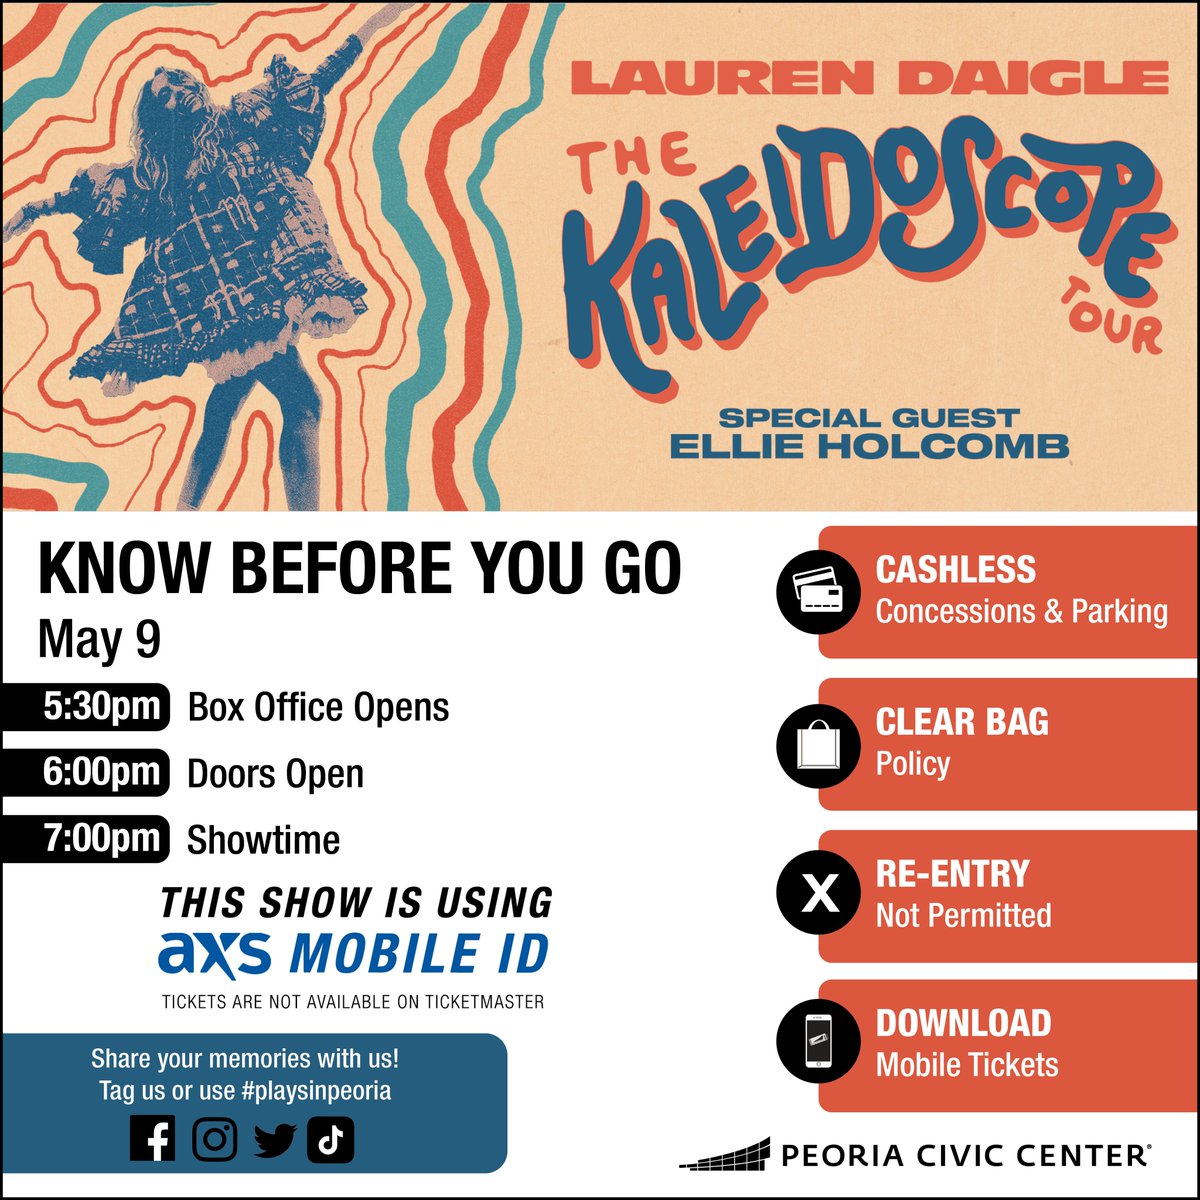 KNOW BEFORE YOU GO Lauren Daigle will be in the Peoria Civic Center Arena on Thursday! Here are some important reminders before you go to the show. More details at bit.ly/PCCKnowBeforeY…